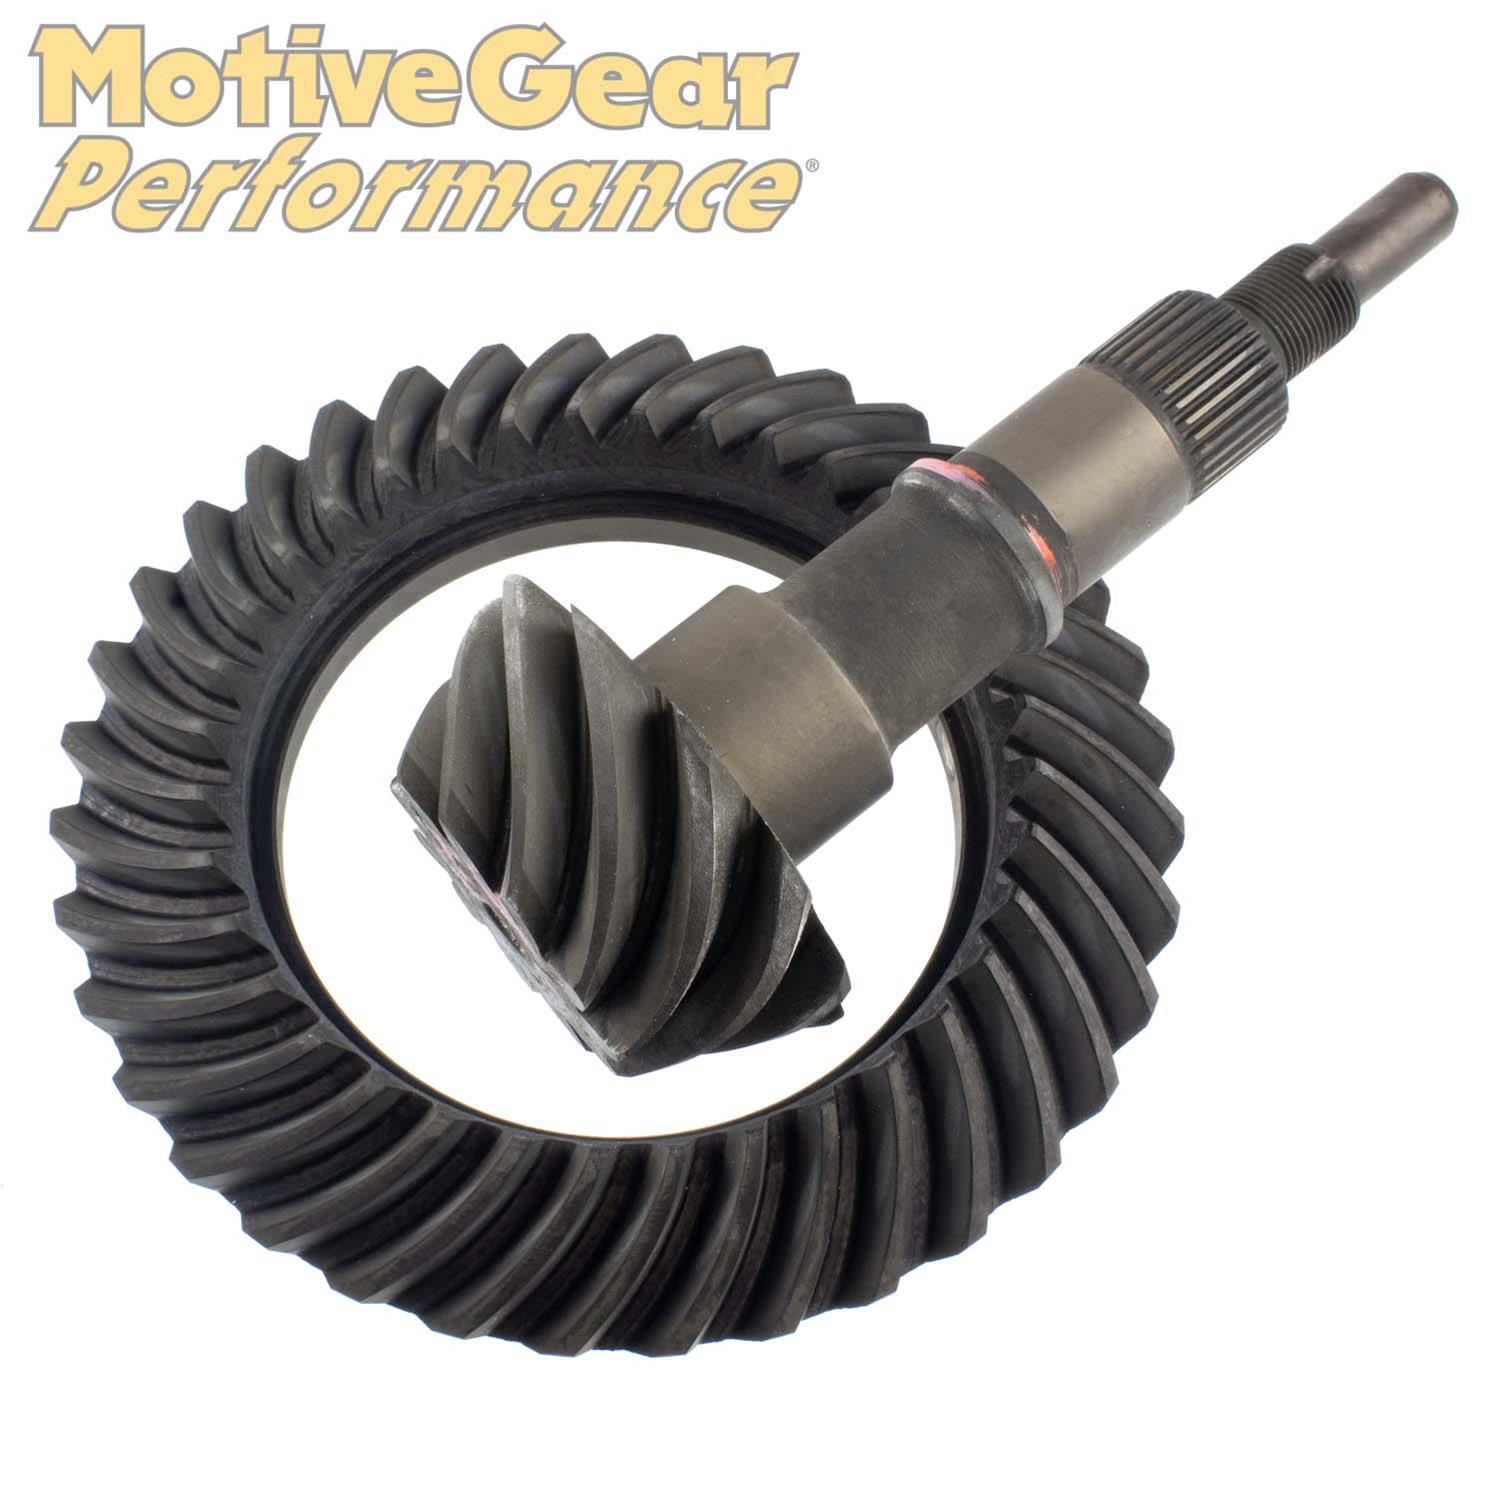 2010-2015 Camaro Motive Gear 3.45 Ring and Pinion Set - For 8.6"